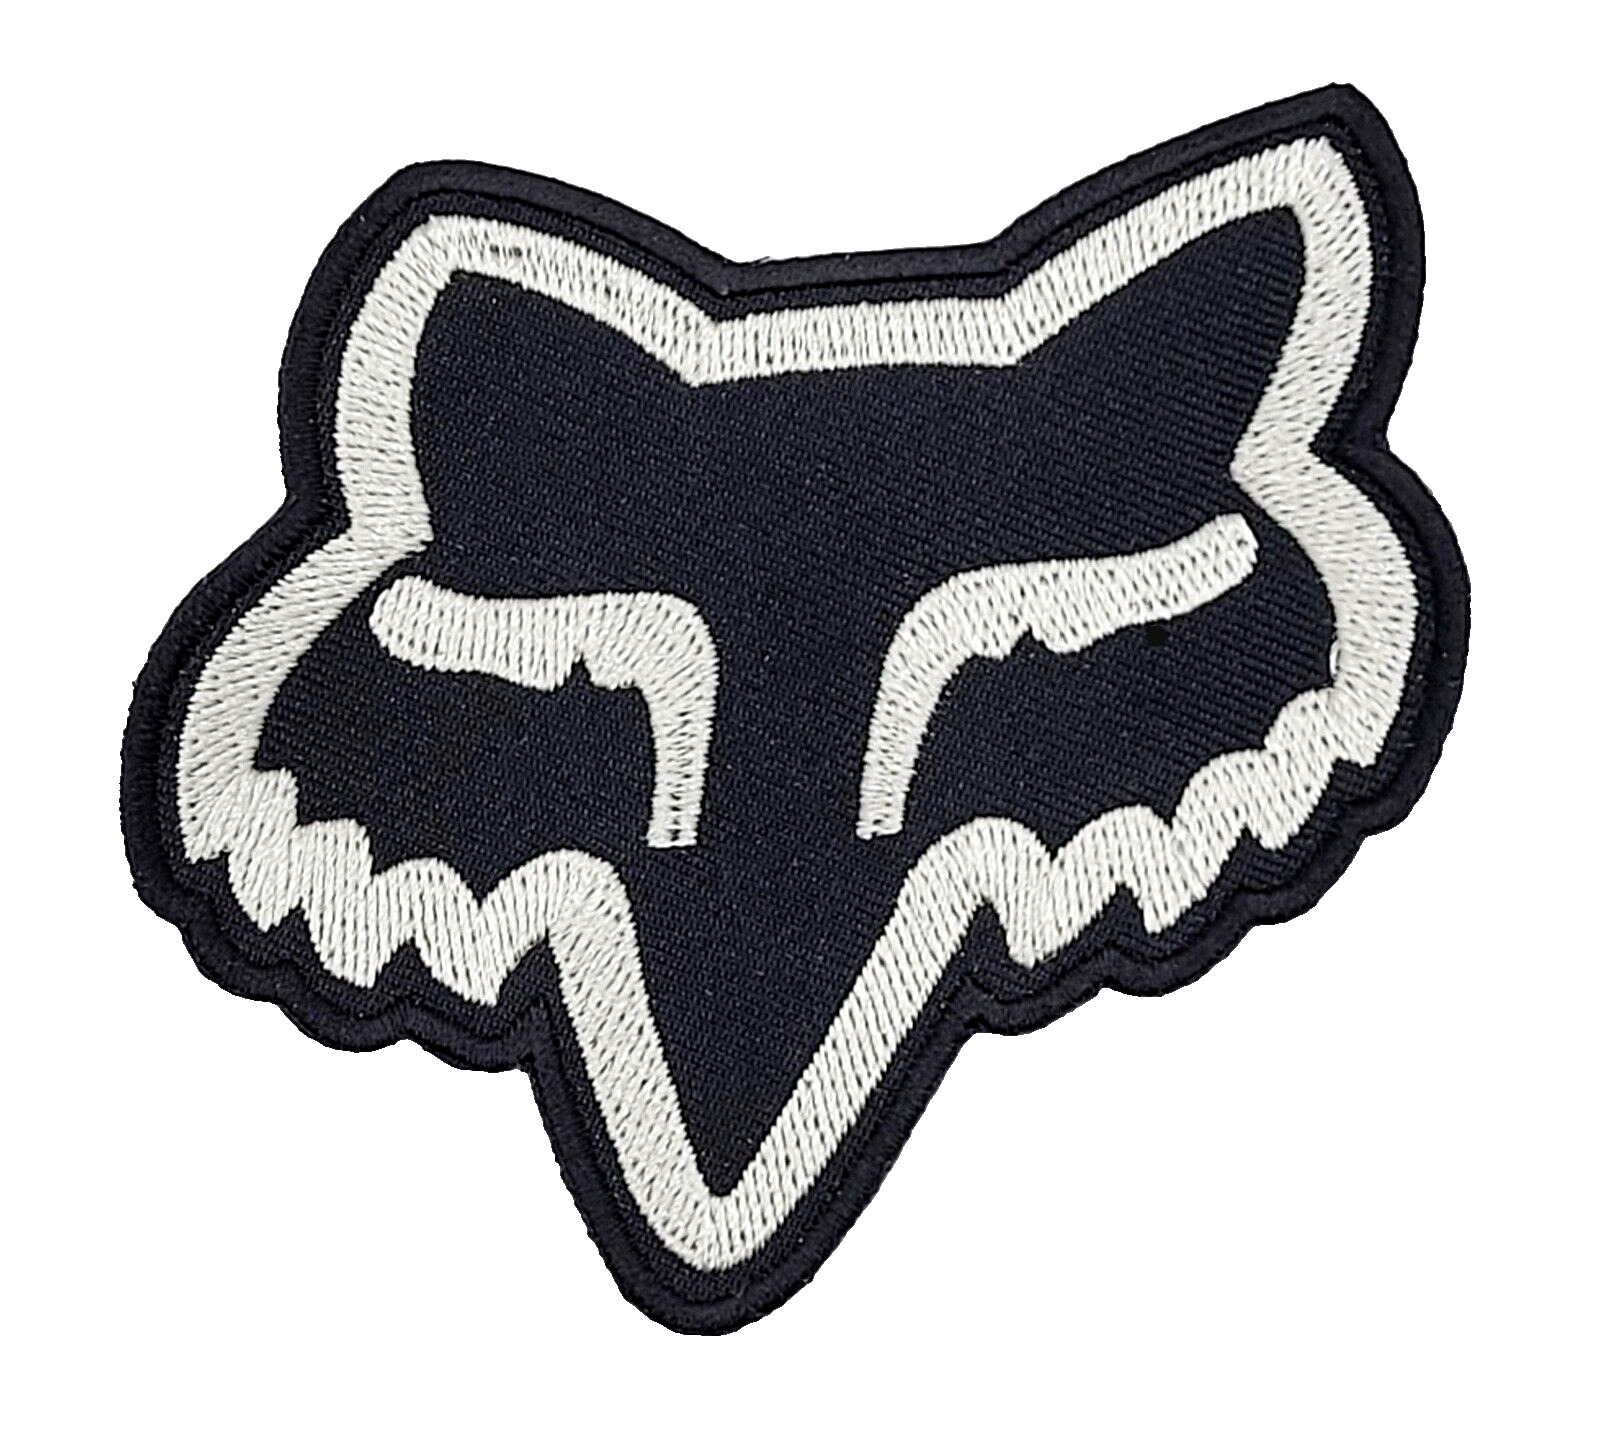 Fox Racing Embroidered Patch [Iron On Sew On] 3.5 Inches For Jackets, Bags..